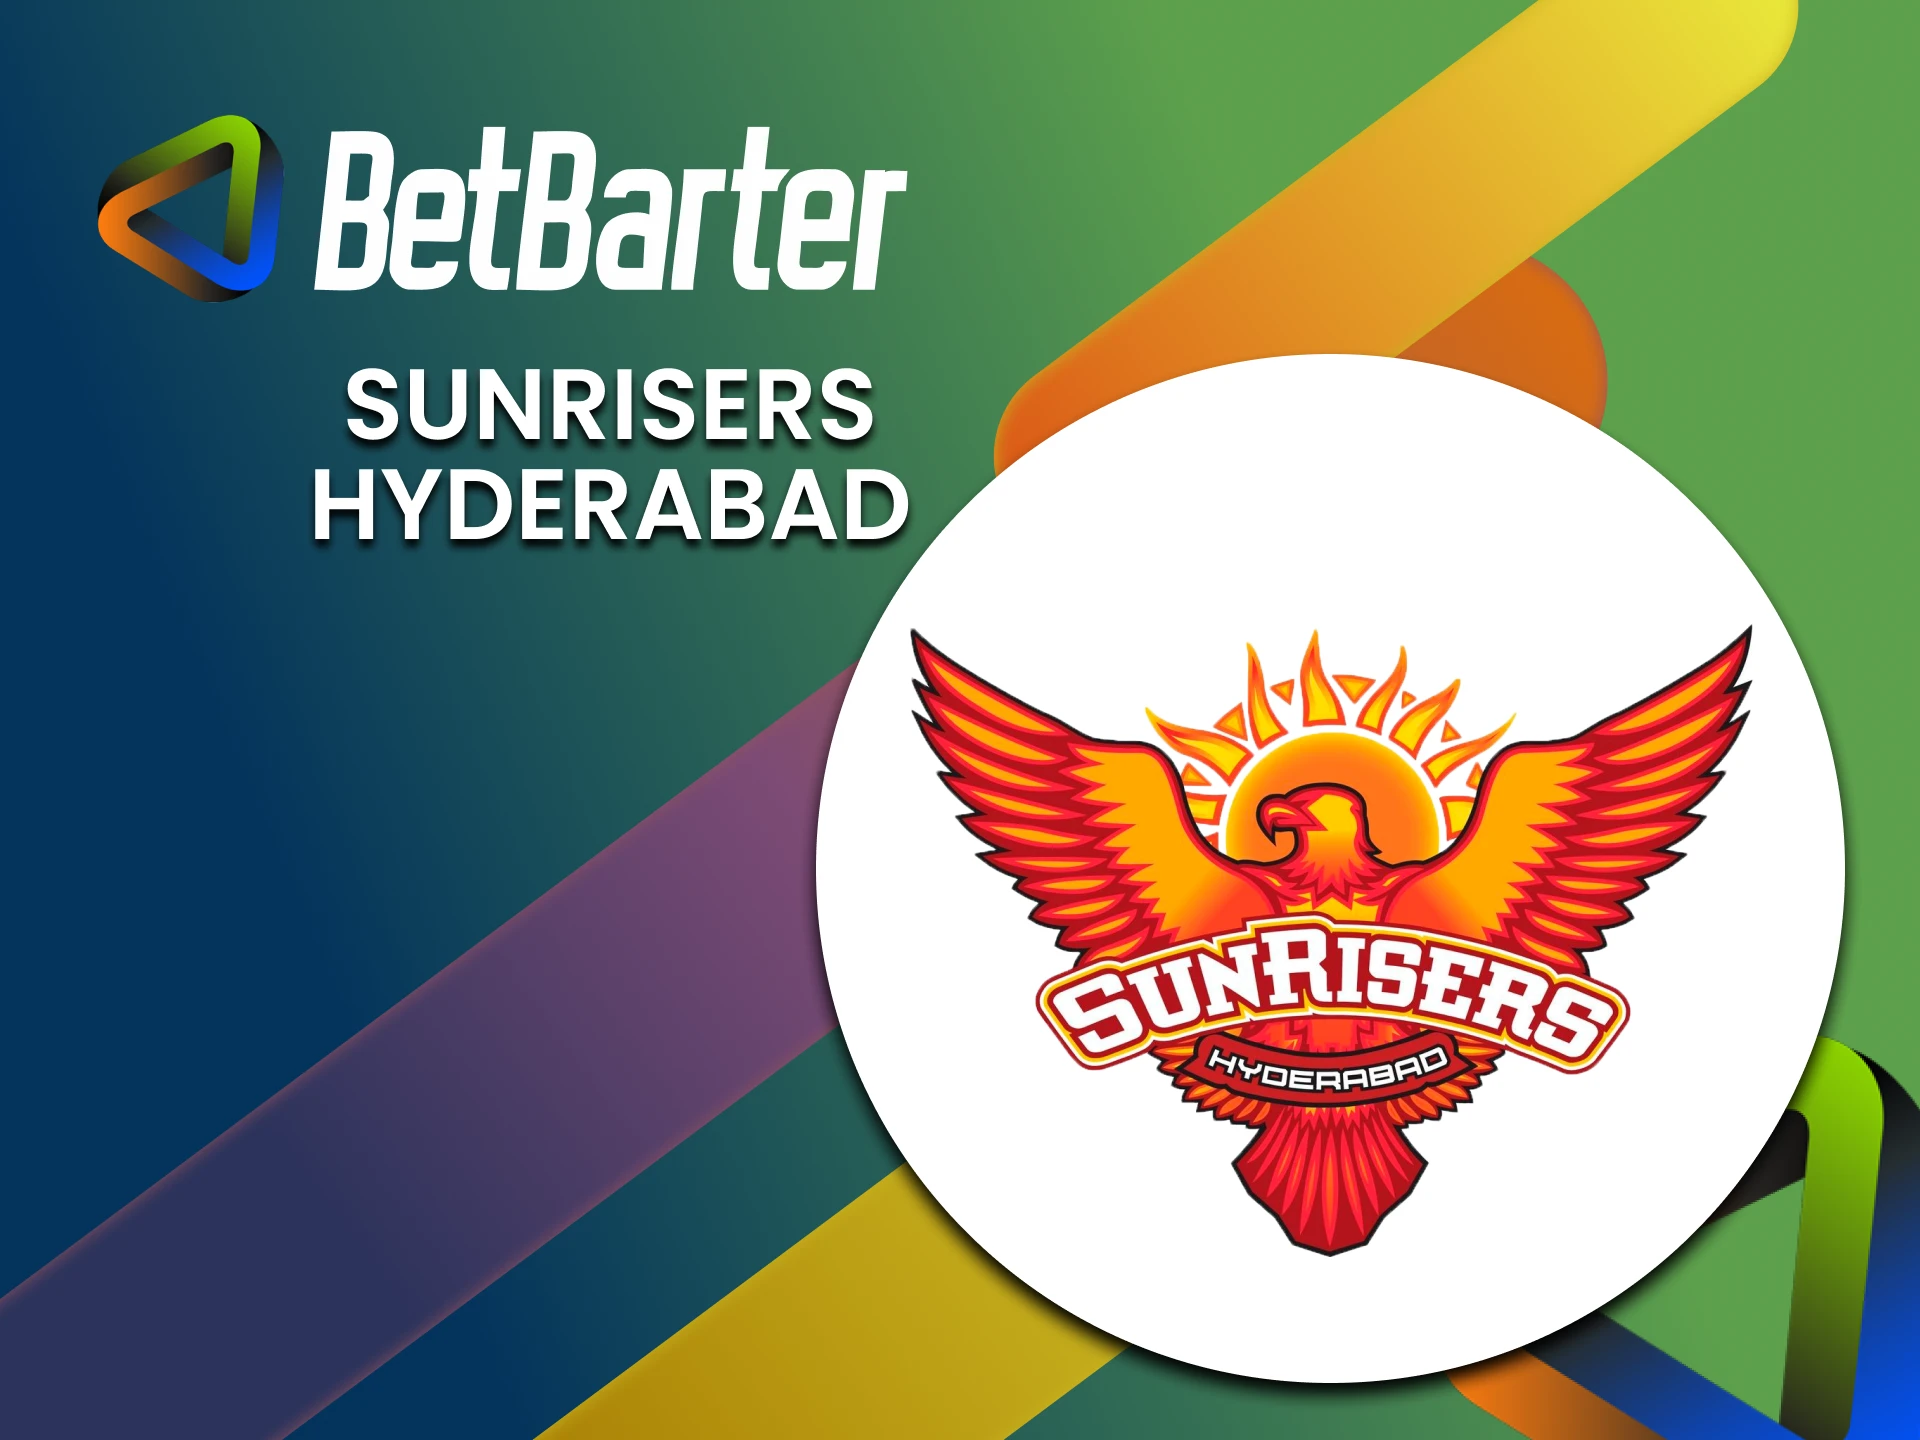 Bet on Sunrisers Hyderabad in the IPL league from BetBarter.